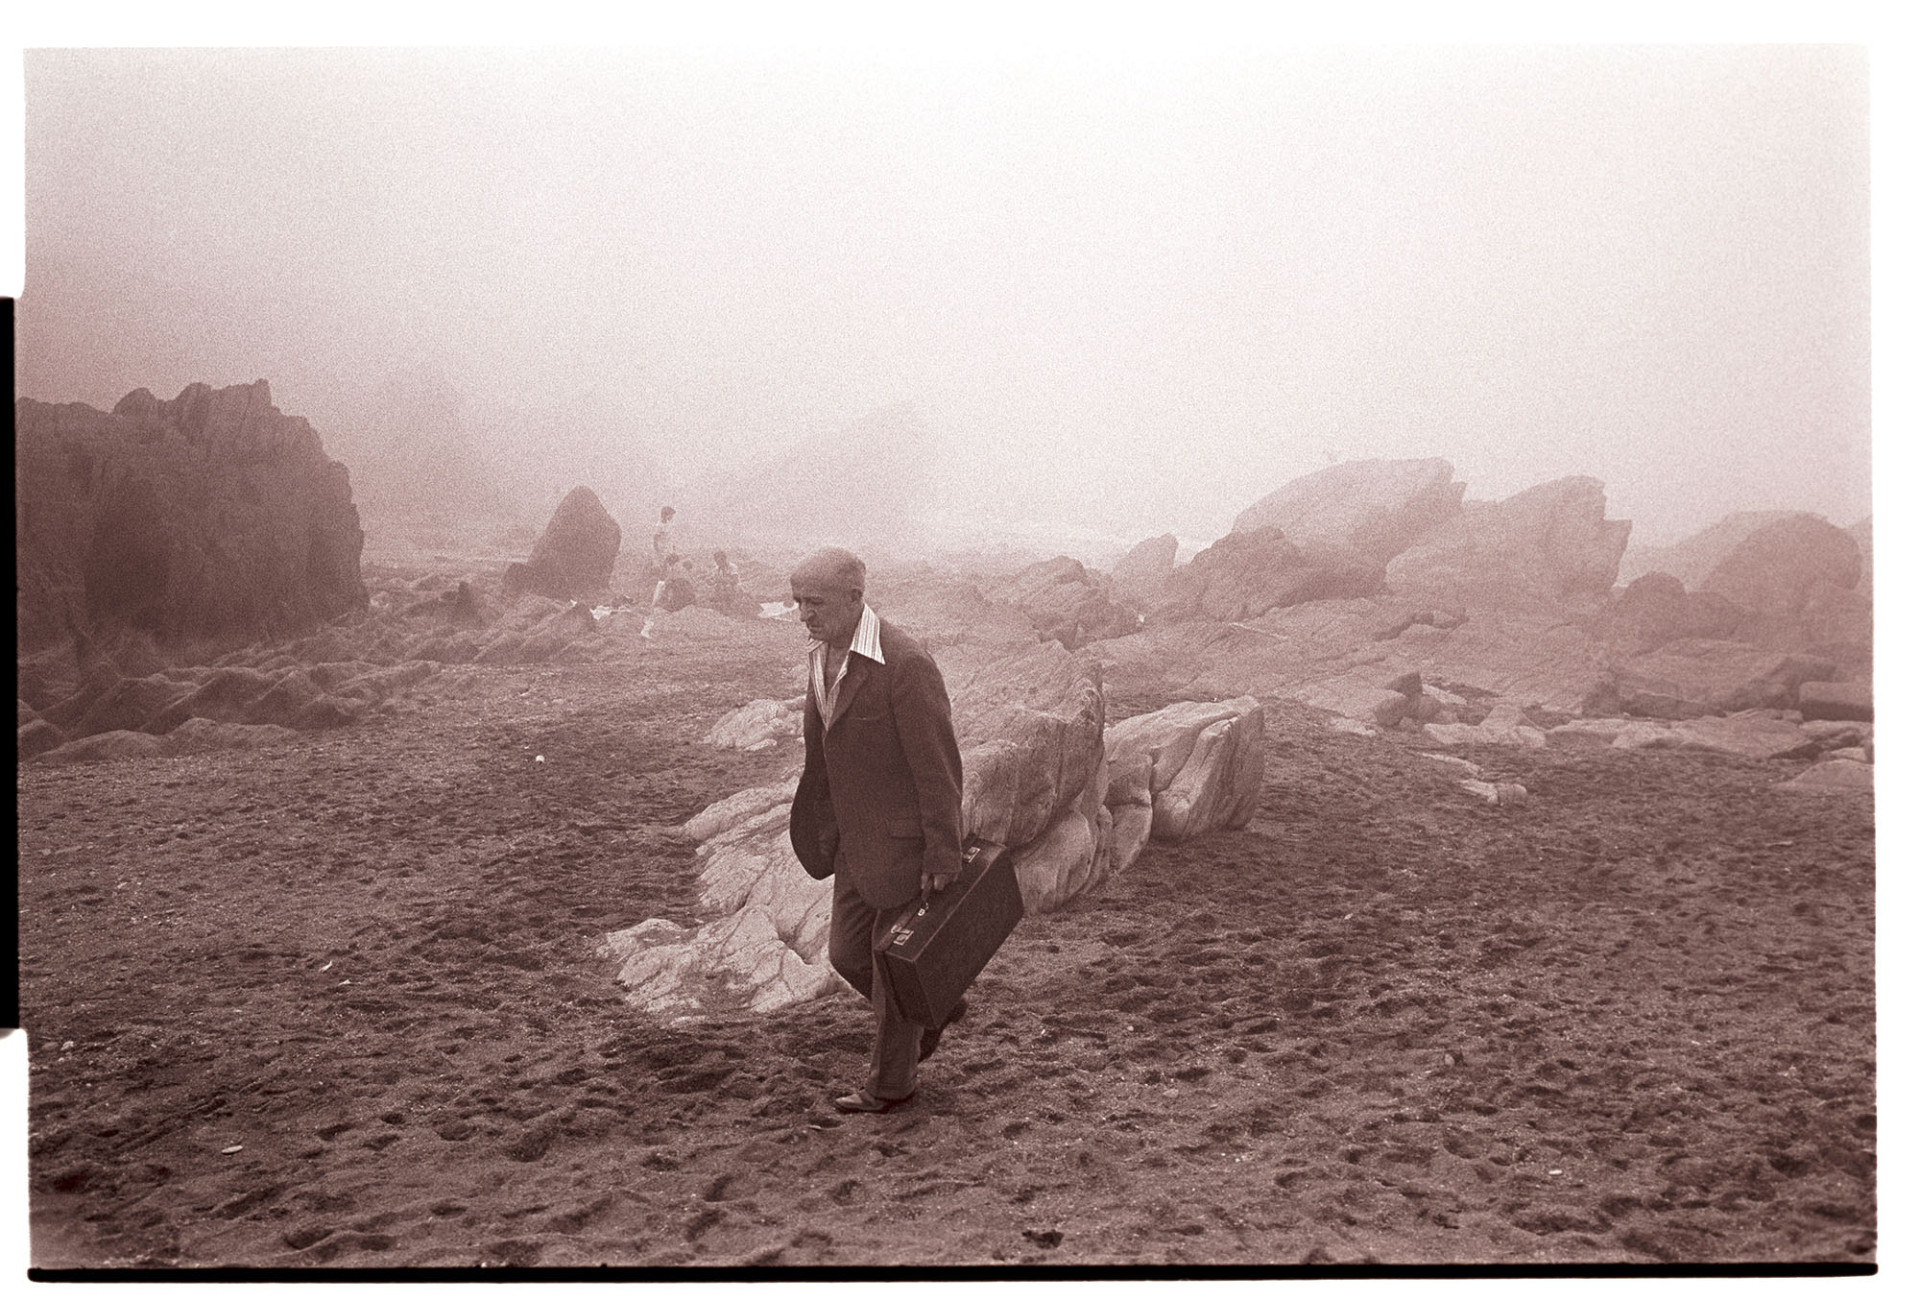 Holidaymakers on rocky shore in thick sea mist.
[A man wearing a suit and carrying a small suitcase walking along Ilfracombe beach in the mist. Holidaymakers are visible in the background by rocks.]